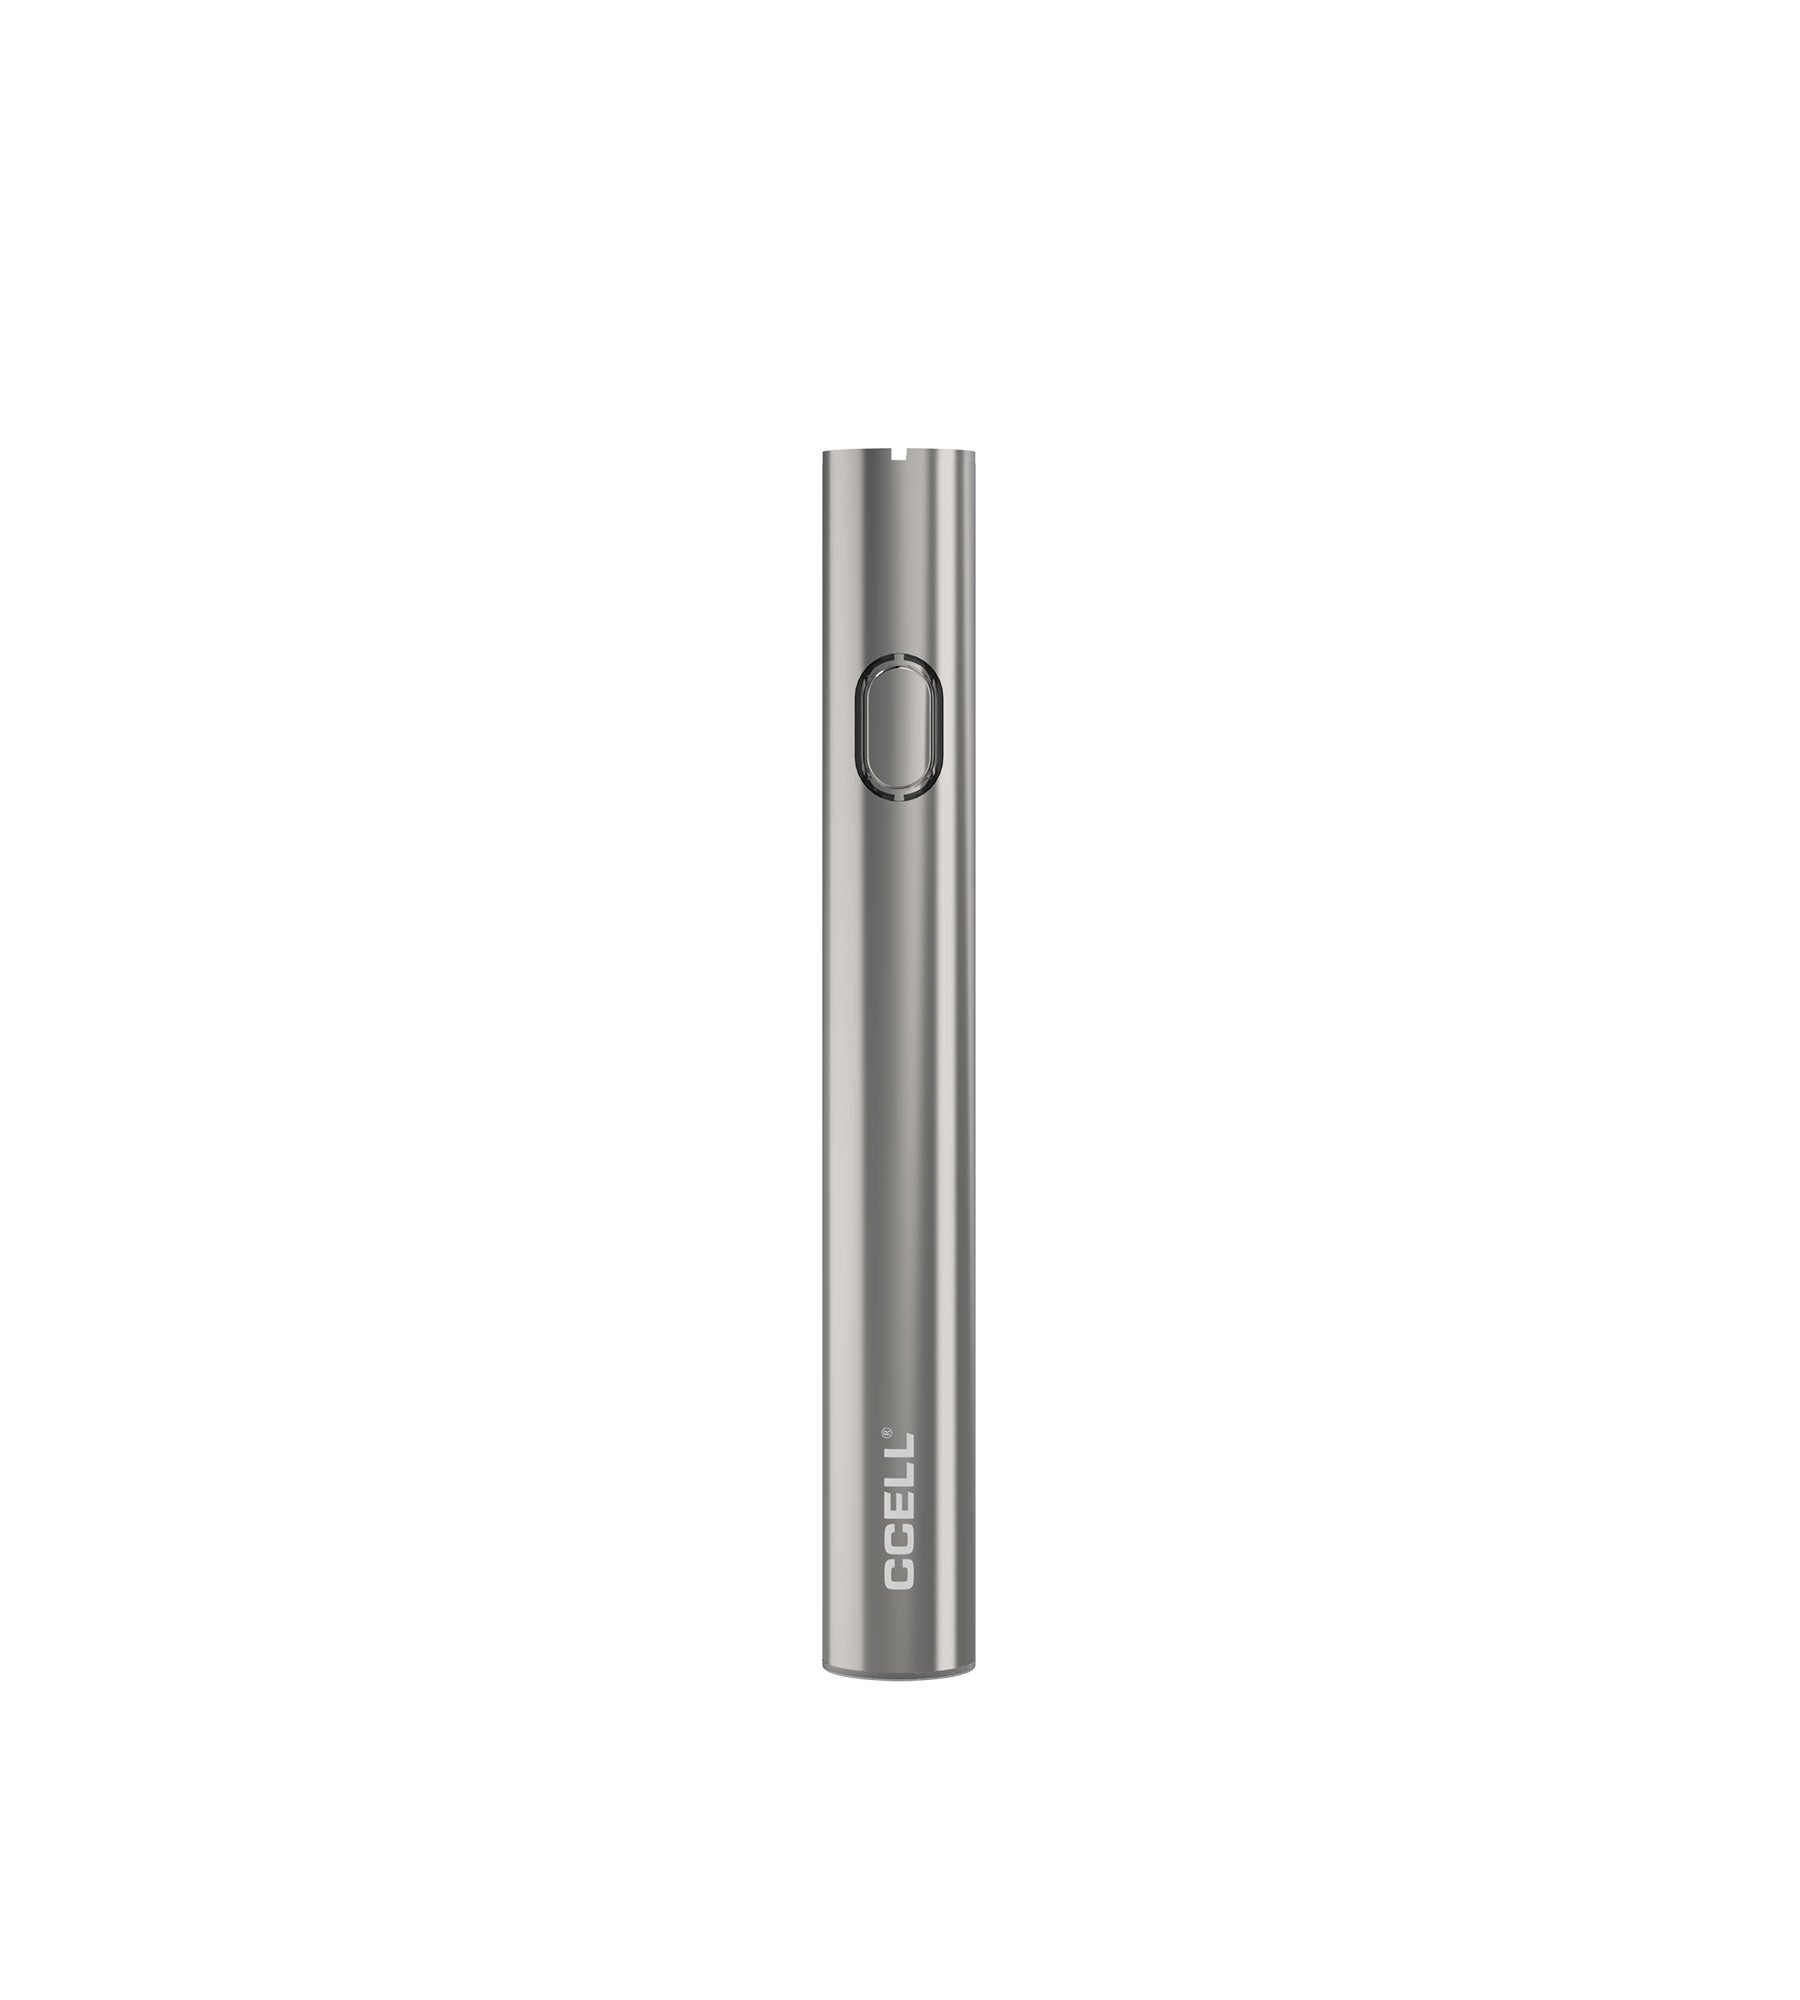 CCELL M3b Silver